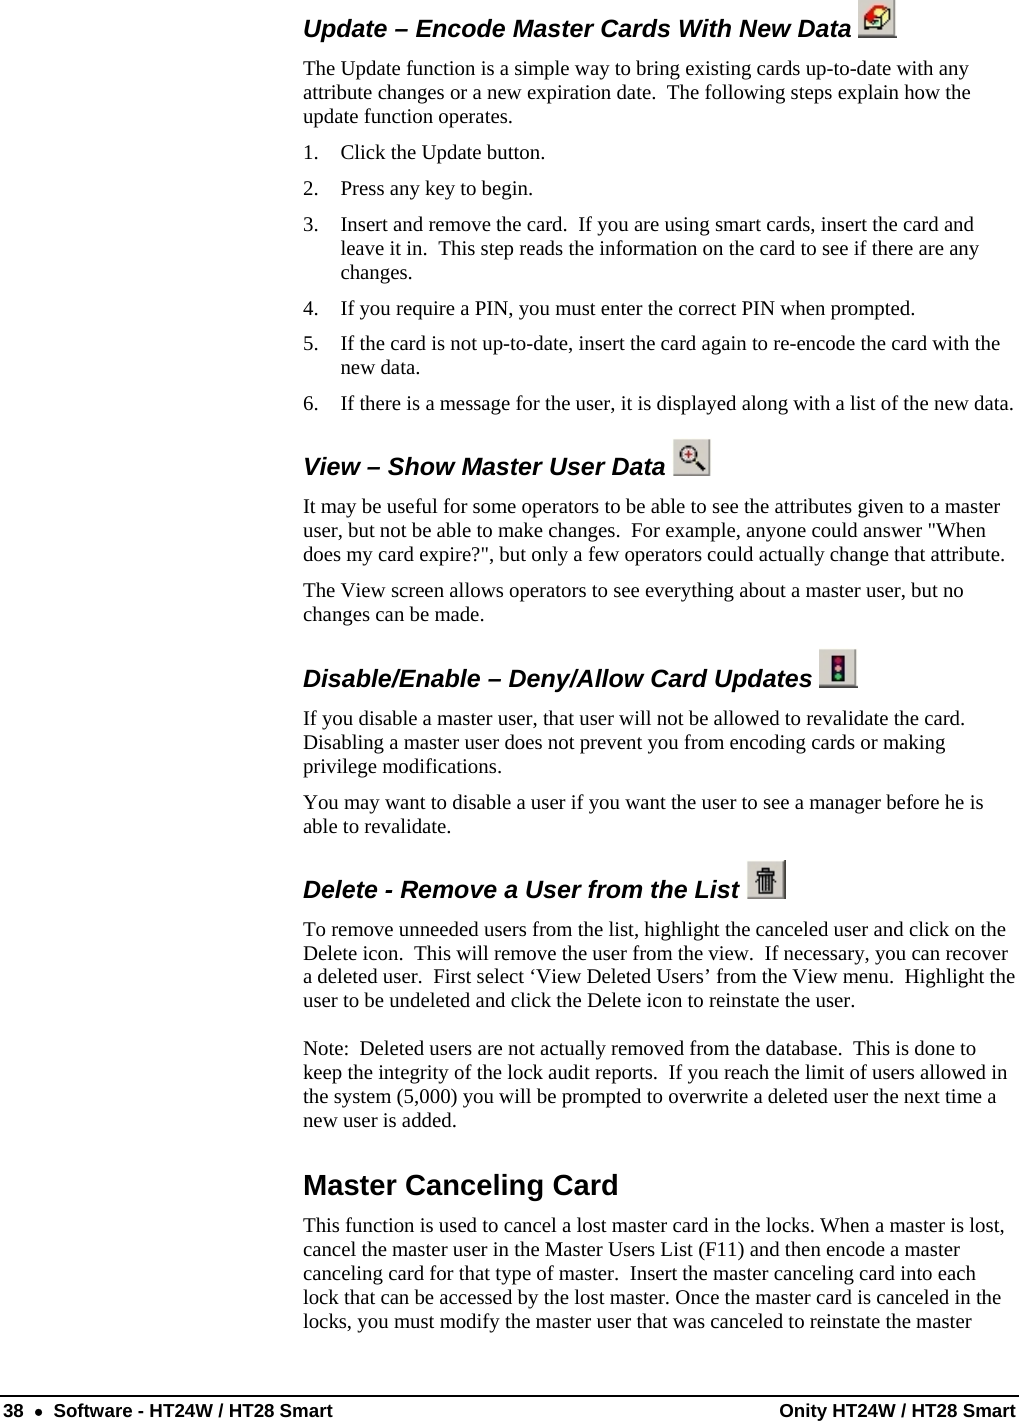  38  •  Software - HT24W / HT28 Smart  Onity HT24W / HT28 Smart Update – Encode Master Cards With New Data    The Update function is a simple way to bring existing cards up-to-date with any attribute changes or a new expiration date.  The following steps explain how the update function operates. 1. Click the Update button. 2. Press any key to begin. 3. Insert and remove the card.  If you are using smart cards, insert the card and leave it in.  This step reads the information on the card to see if there are any changes. 4. If you require a PIN, you must enter the correct PIN when prompted. 5. If the card is not up-to-date, insert the card again to re-encode the card with the new data. 6. If there is a message for the user, it is displayed along with a list of the new data.View – Show Master User Data    It may be useful for some operators to be able to see the attributes given to a master user, but not be able to make changes.  For example, anyone could answer &quot;When does my card expire?&quot;, but only a few operators could actually change that attribute. The View screen allows operators to see everything about a master user, but no changes can be made. Disable/Enable – Deny/Allow Card Updates    If you disable a master user, that user will not be allowed to revalidate the card.  Disabling a master user does not prevent you from encoding cards or making privilege modifications. You may want to disable a user if you want the user to see a manager before he is able to revalidate. Delete - Remove a User from the List   To remove unneeded users from the list, highlight the canceled user and click on the Delete icon.  This will remove the user from the view.  If necessary, you can recover a deleted user.  First select ‘View Deleted Users’ from the View menu.  Highlight the user to be undeleted and click the Delete icon to reinstate the user.  Note:  Deleted users are not actually removed from the database.  This is done to keep the integrity of the lock audit reports.  If you reach the limit of users allowed in the system (5,000) you will be prompted to overwrite a deleted user the next time a new user is added. Master Canceling Card This function is used to cancel a lost master card in the locks. When a master is lost, cancel the master user in the Master Users List (F11) and then encode a master canceling card for that type of master.  Insert the master canceling card into each lock that can be accessed by the lost master. Once the master card is canceled in the locks, you must modify the master user that was canceled to reinstate the master 